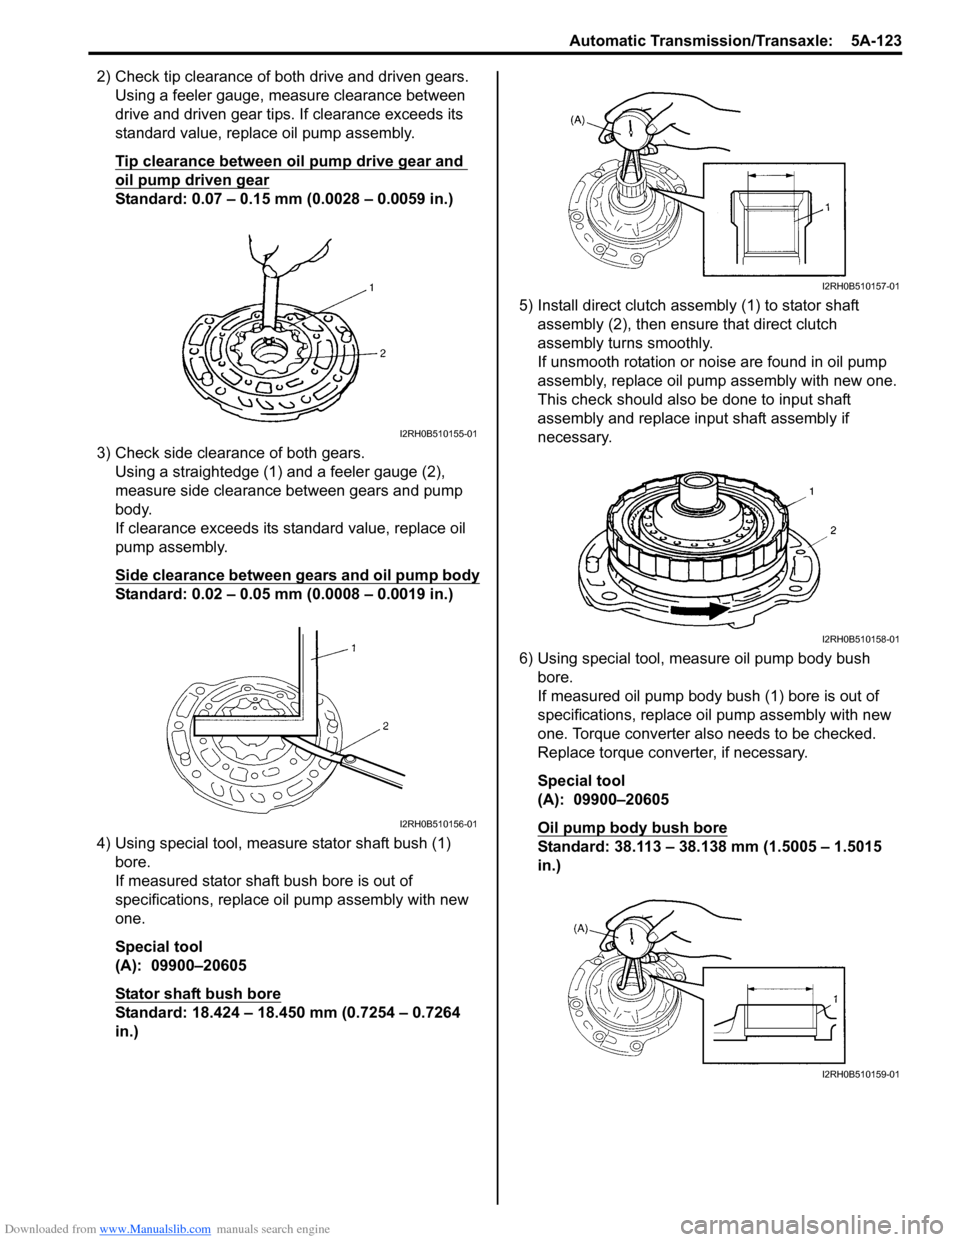 SUZUKI SWIFT 2004 2.G Service Service Manual Downloaded from www.Manualslib.com manuals search engine Automatic Transmission/Transaxle:  5A-123
2) Check tip clearance of both drive and driven gears.Using a feeler gauge, m easure clearance betwee